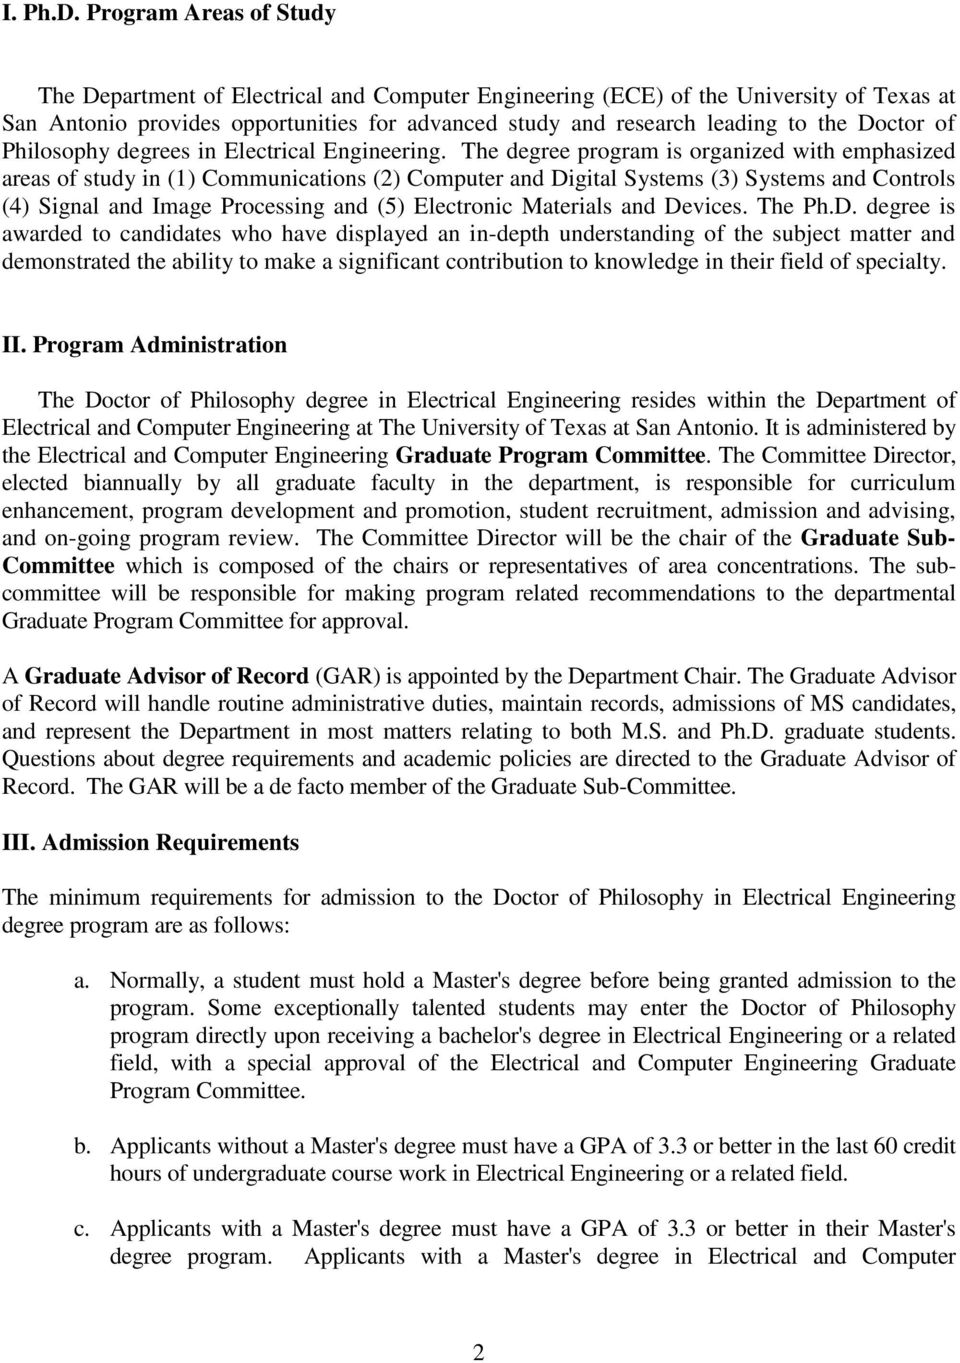 Doctor of Philosophy degrees in Electrical Engineering.